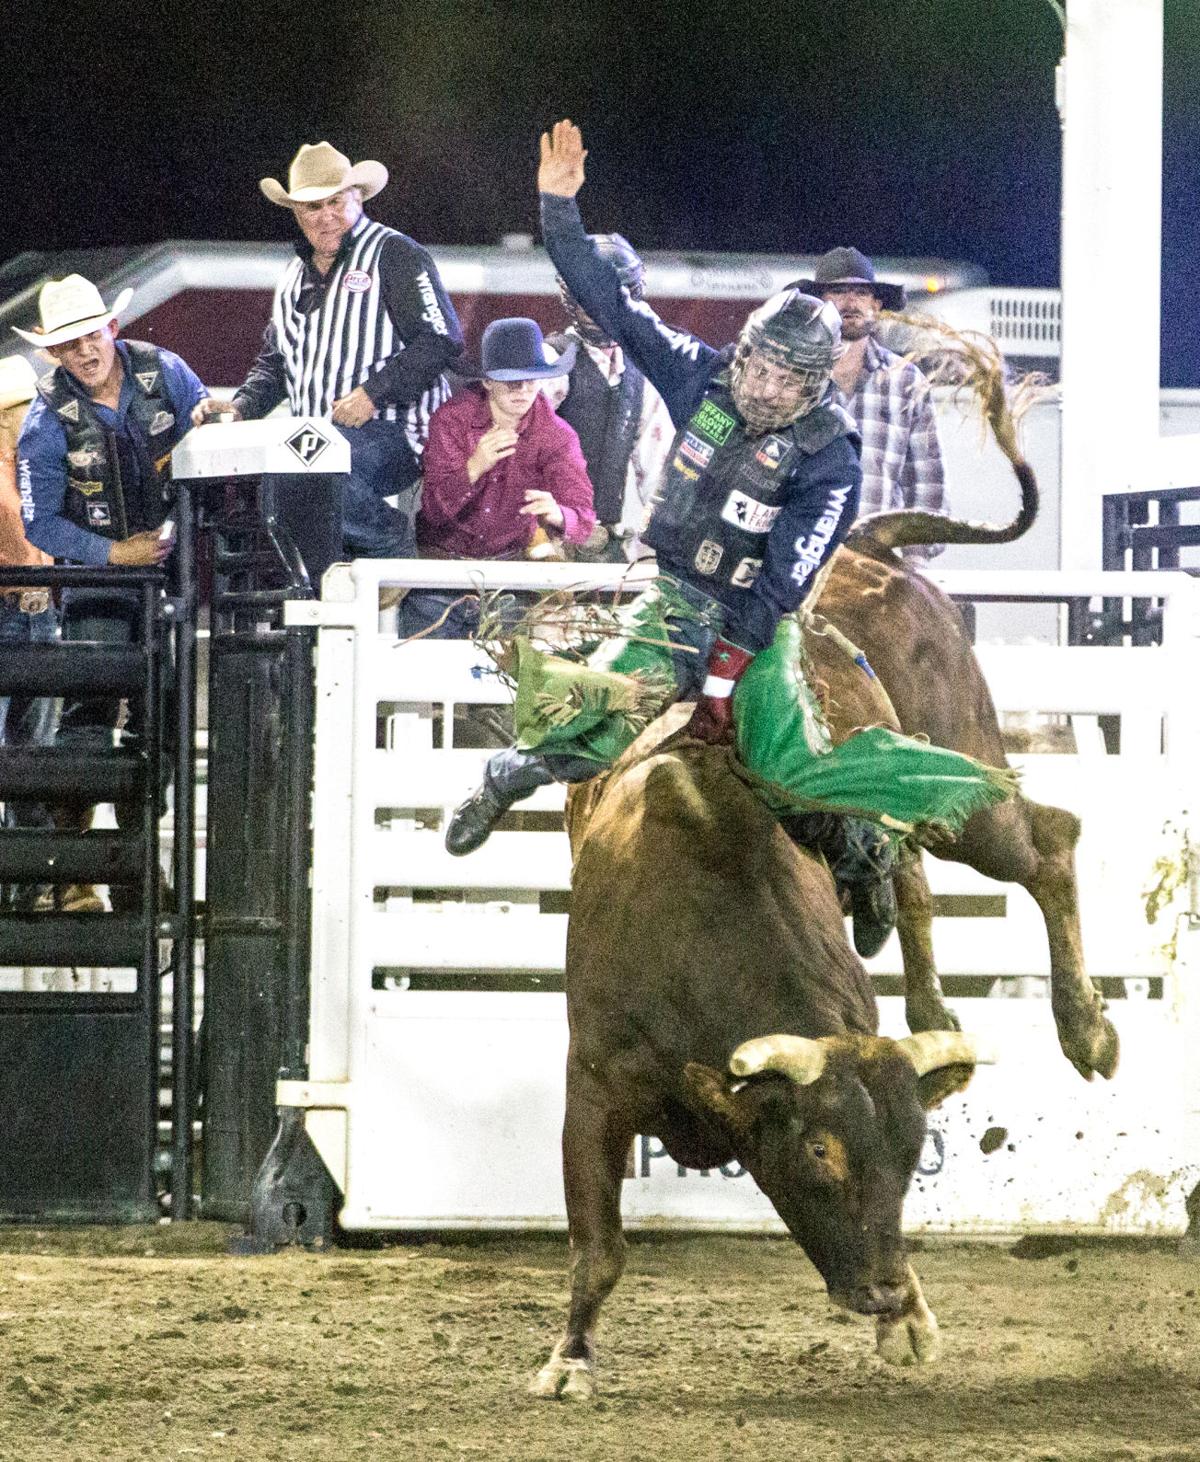 Rodeo Biglow has record night at FCPR